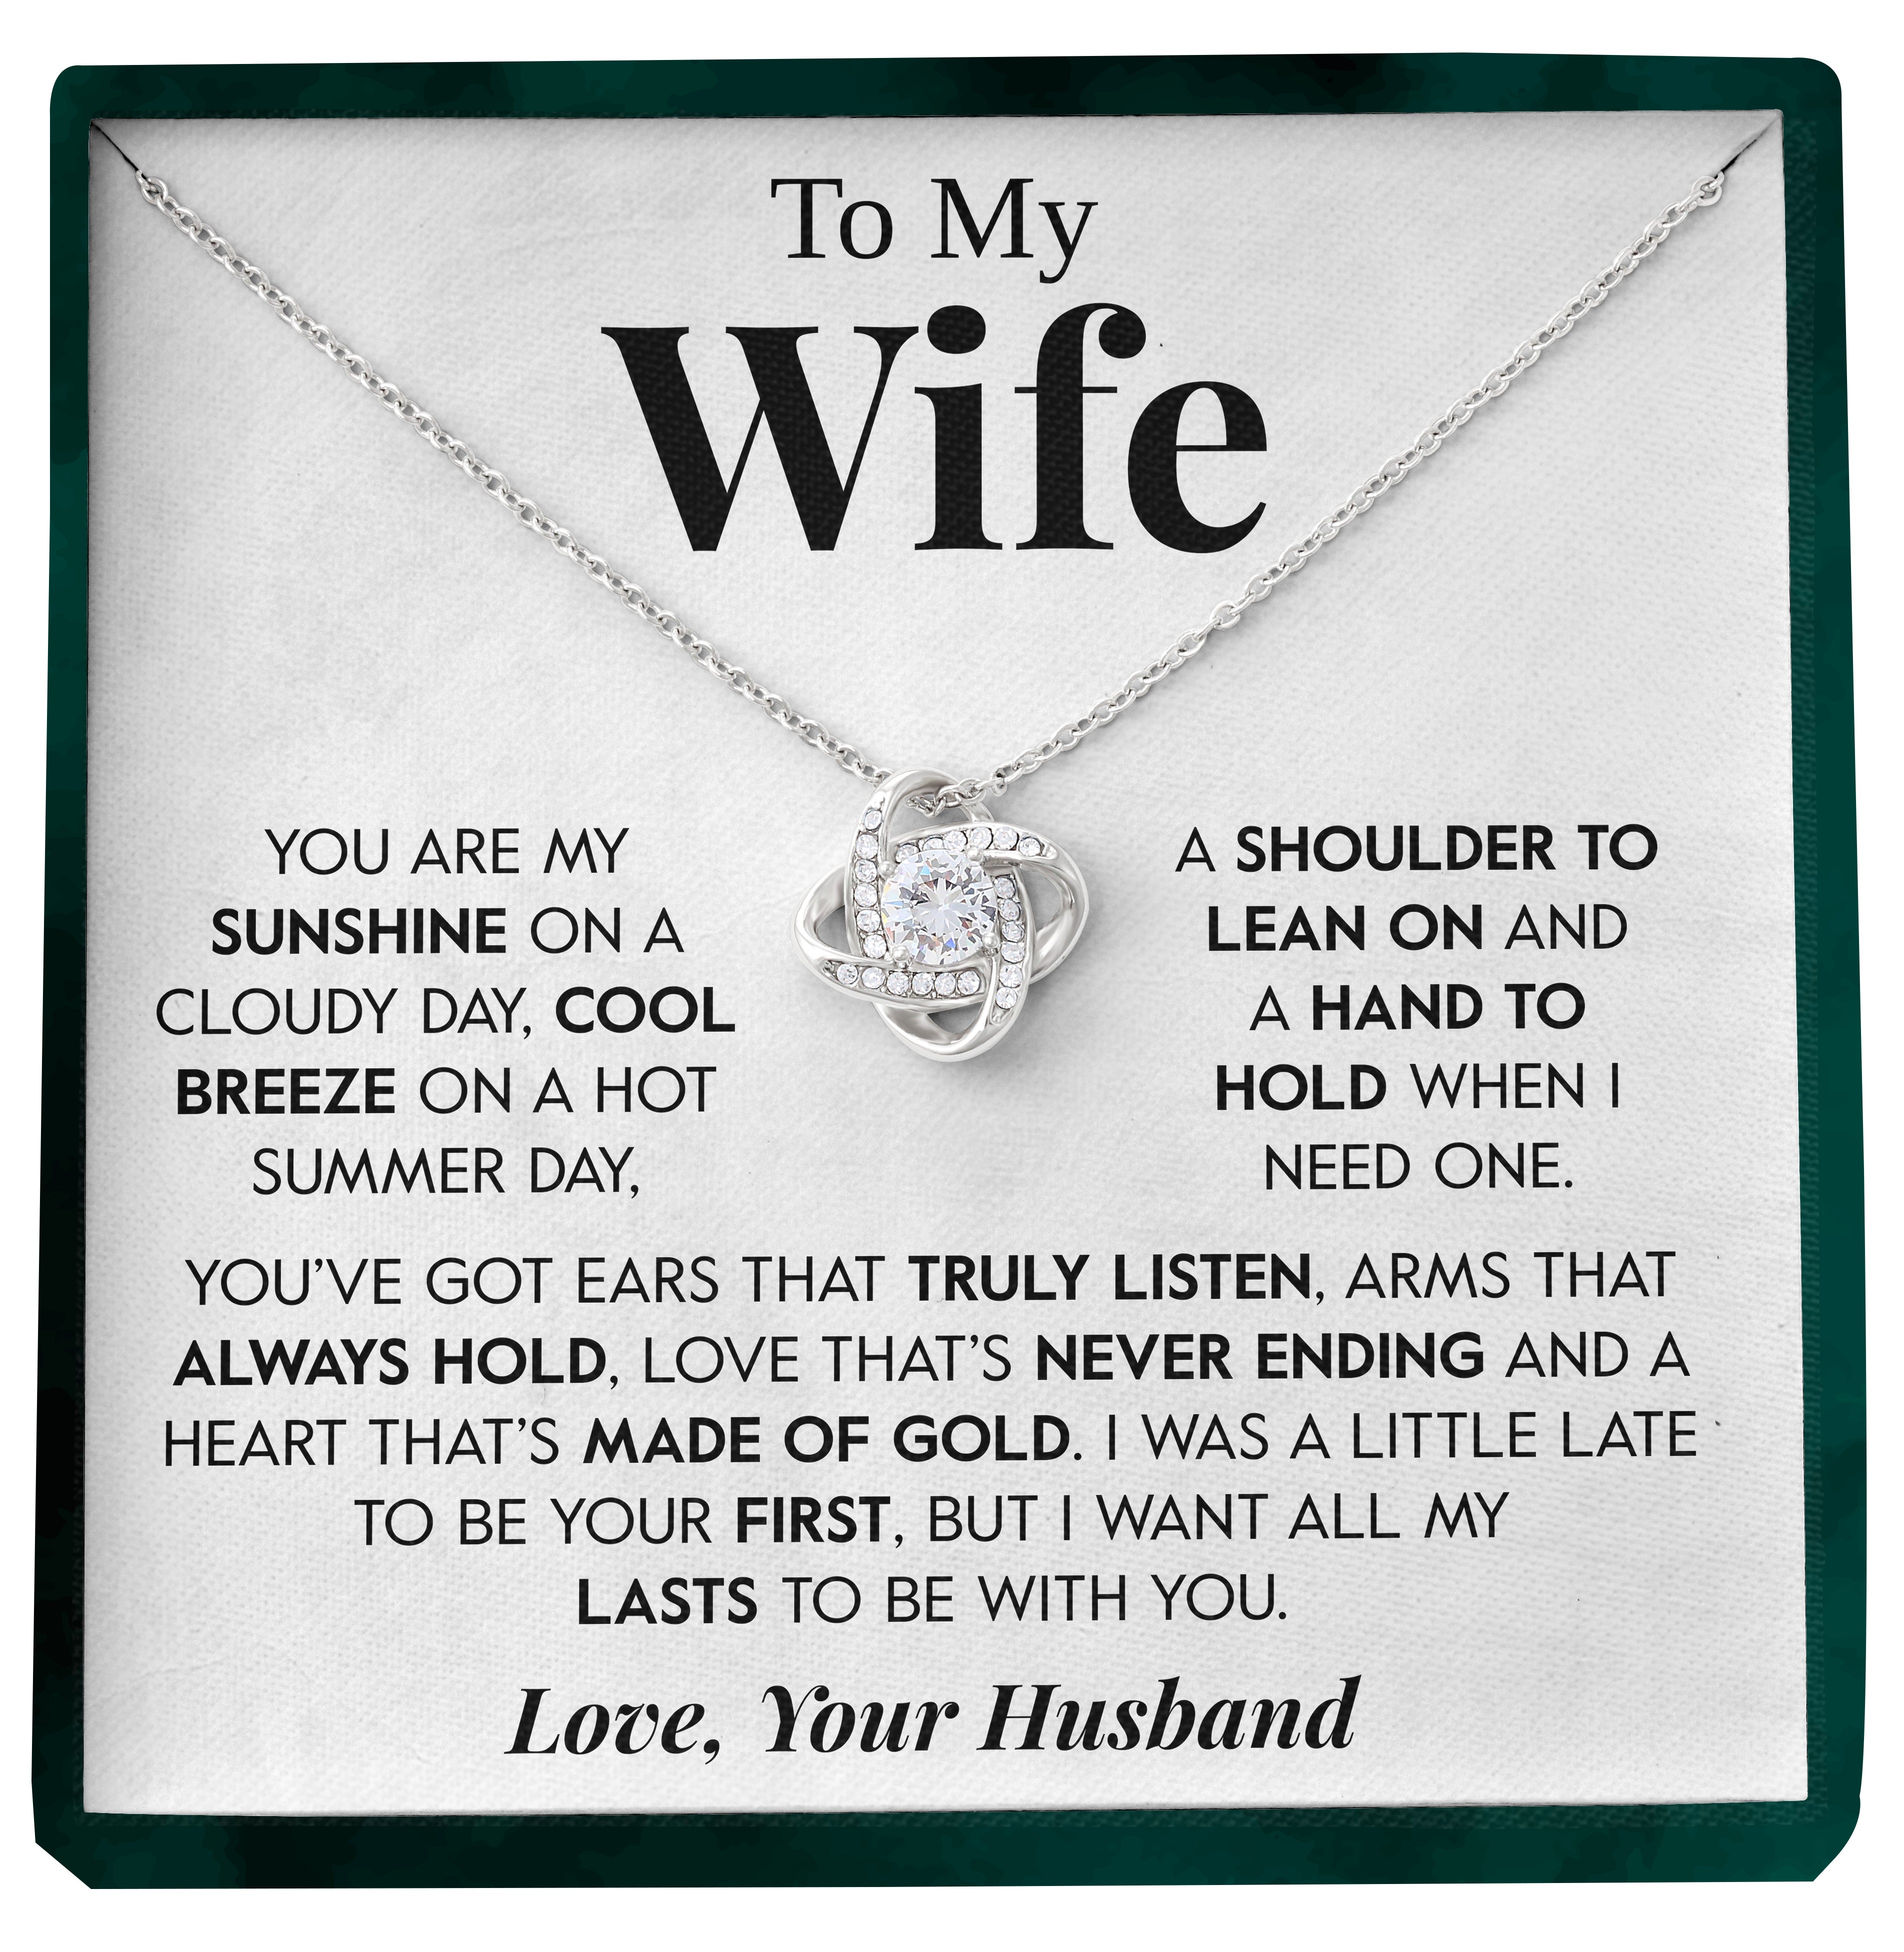 To My Wife | "All of my Lasts" | Love Knot Necklace